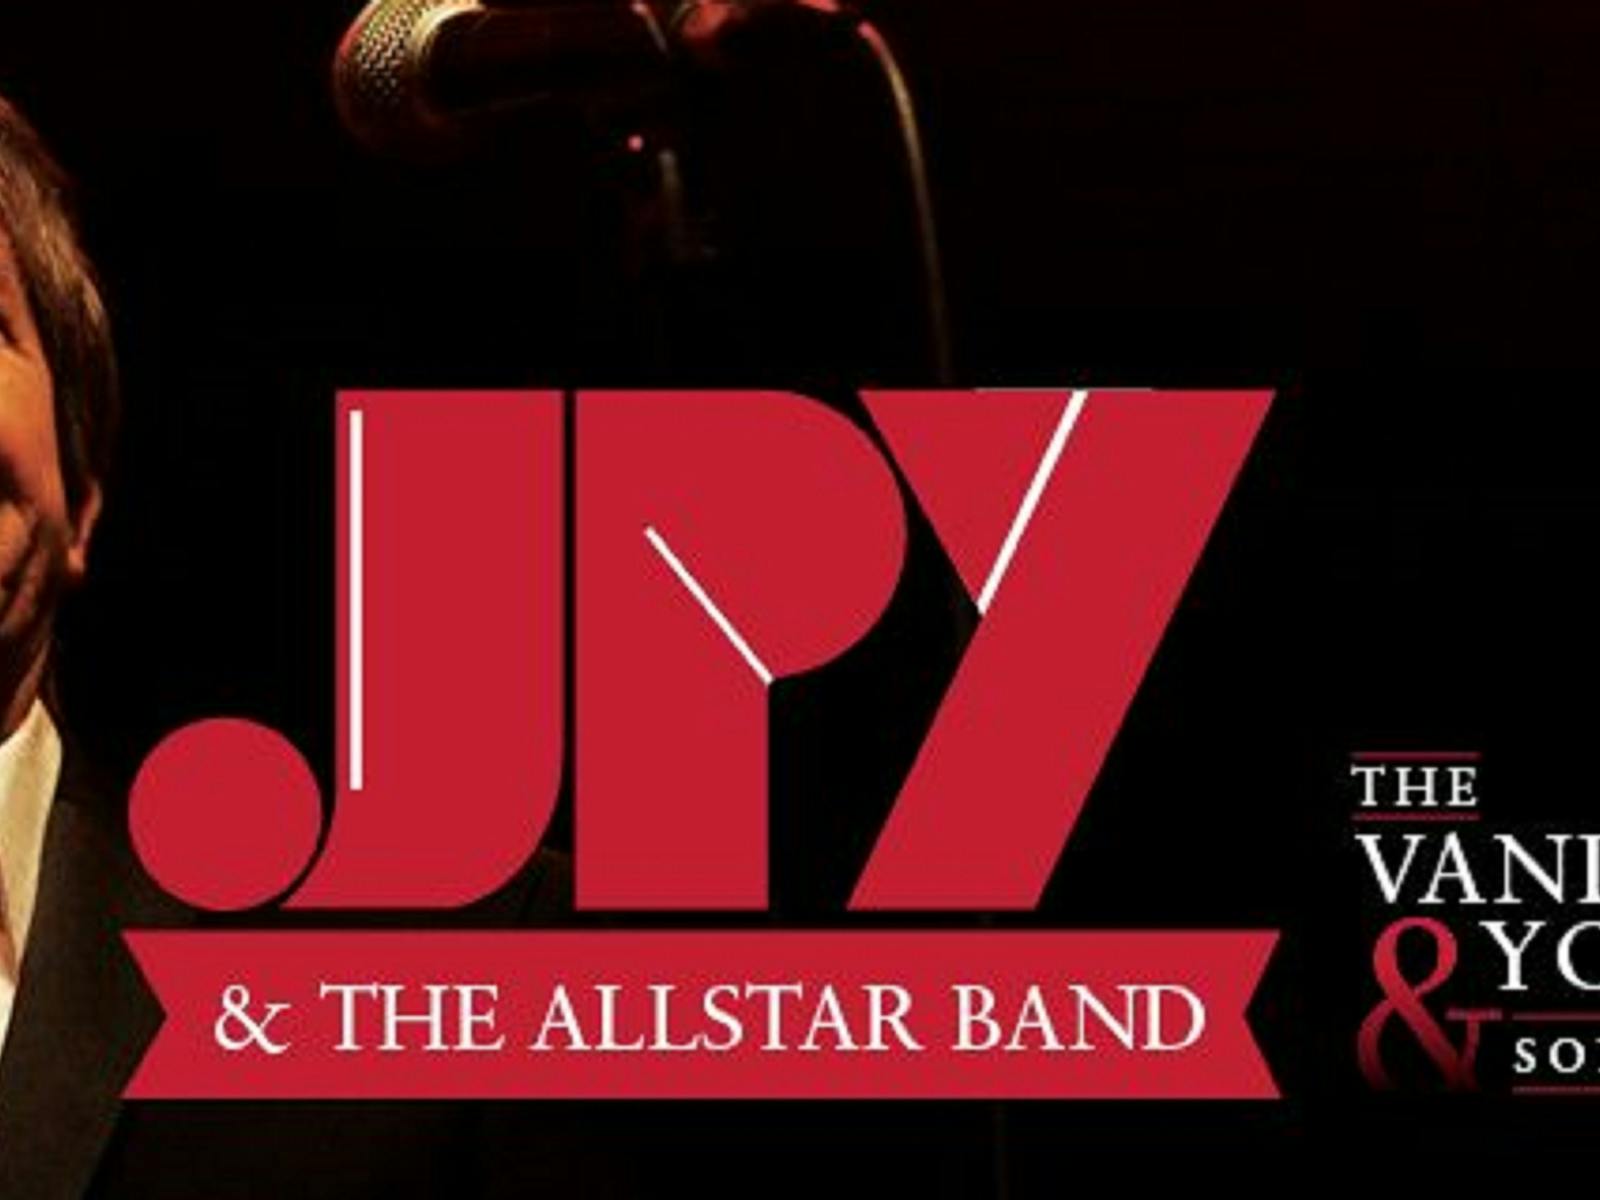 Image for JPY and The Allstar Band The Vanda and Young Songbook